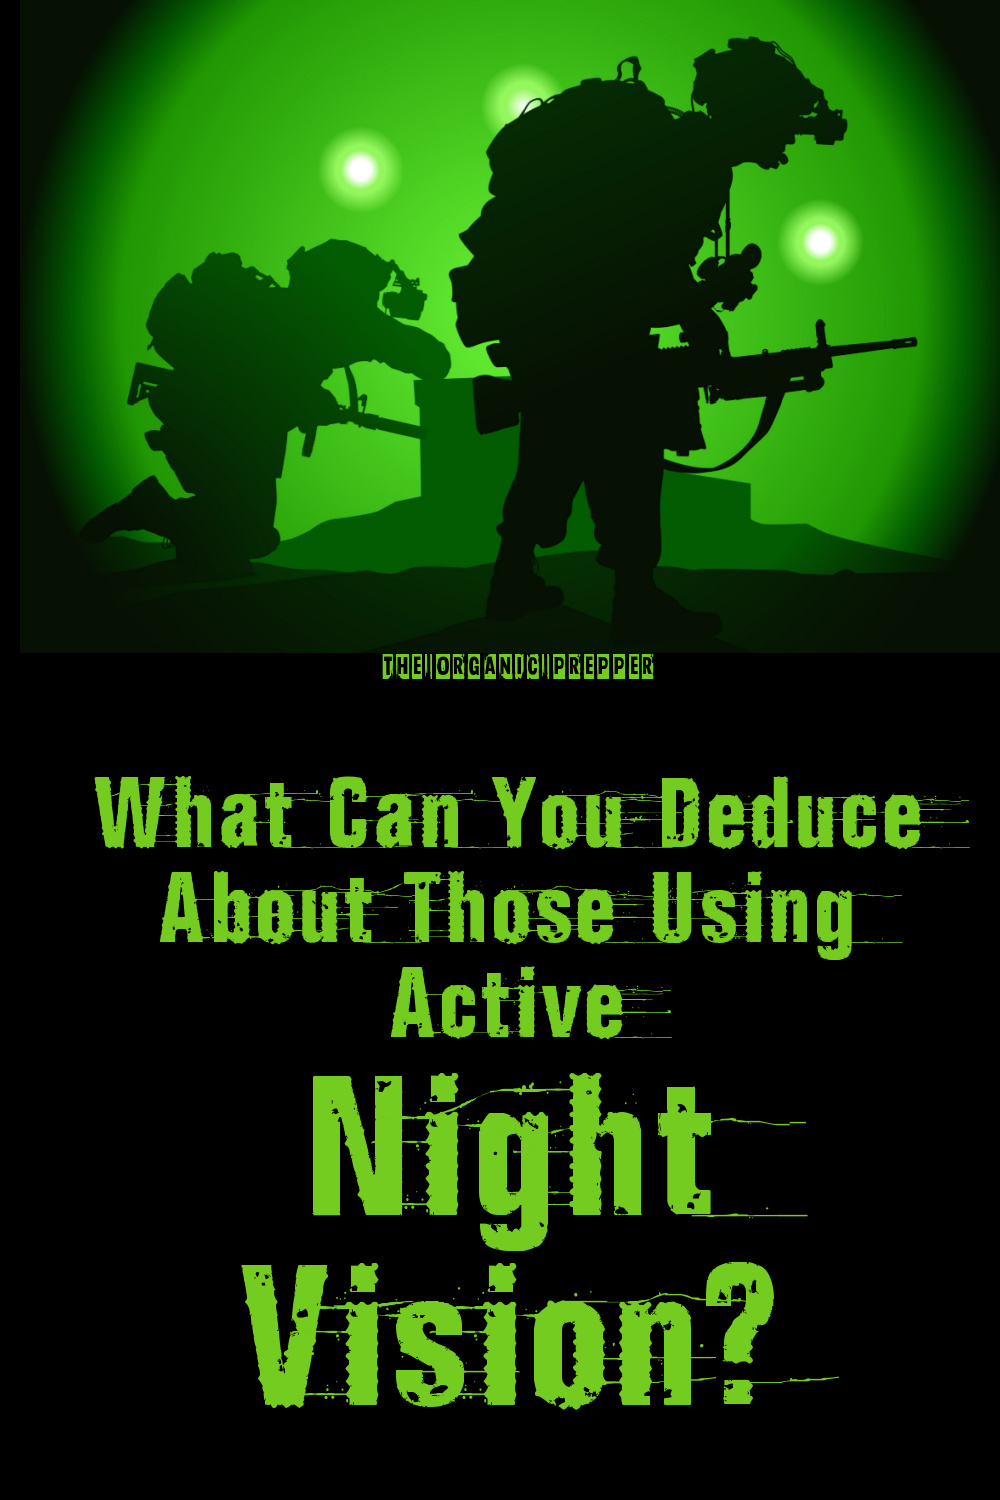 What Can You Deduce About Those Using Active Night Vision?